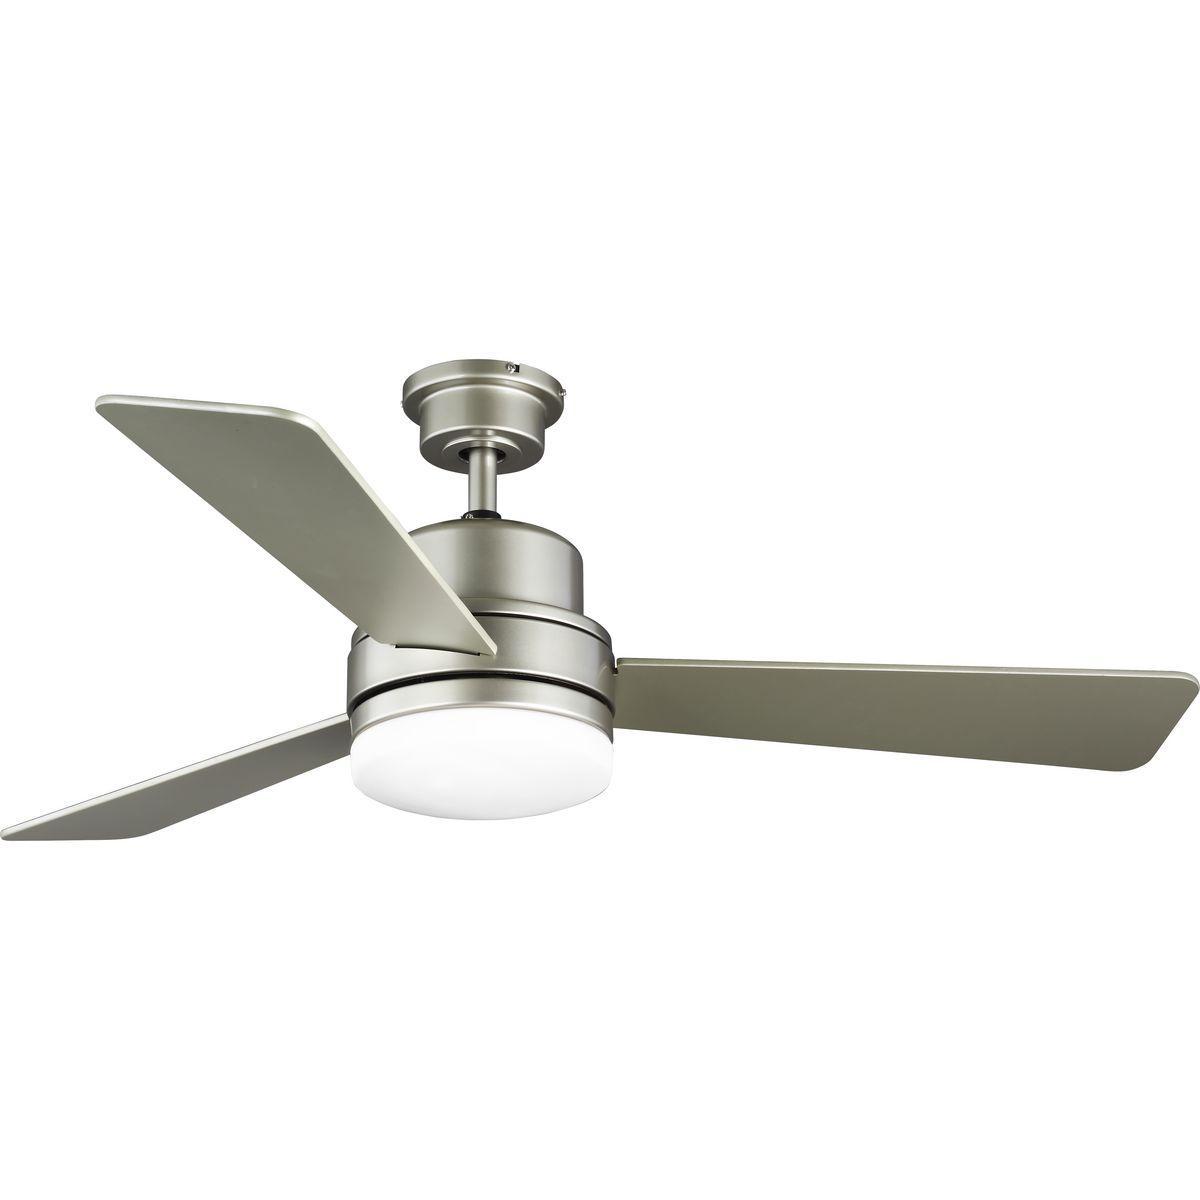 Hubbell P2553-152WB This ceiling fan includes two LED bulbs covered by a white opal shade to help extend your day into the evening. You and your family will relax in your peaceful retreat created by the cool breeze coming from the three-blades rotating overhead. The fixture 